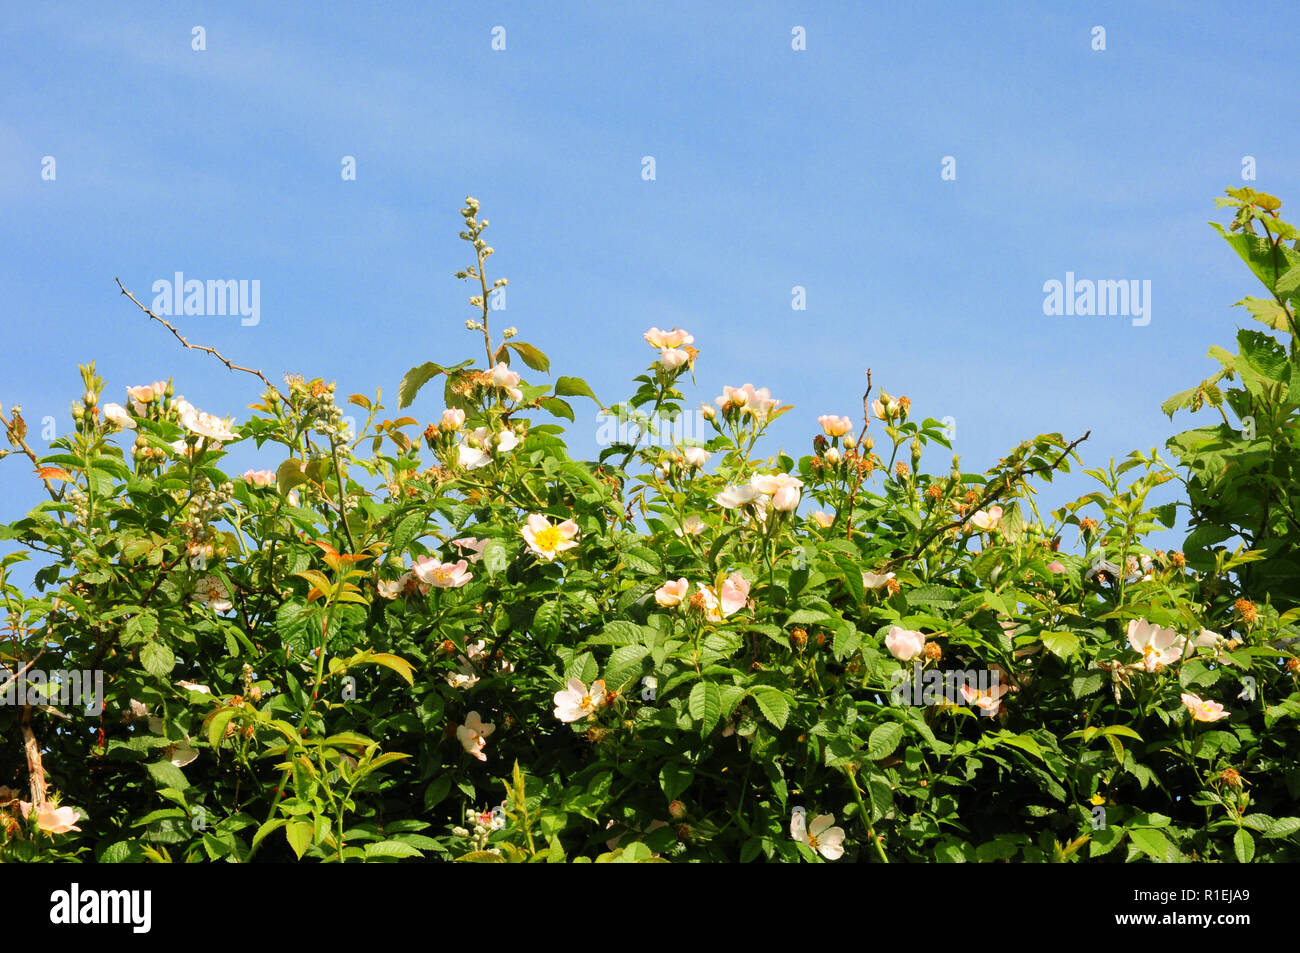 Dog roses, Rosa canina, blooming in an English hedgerow. Stock Photo